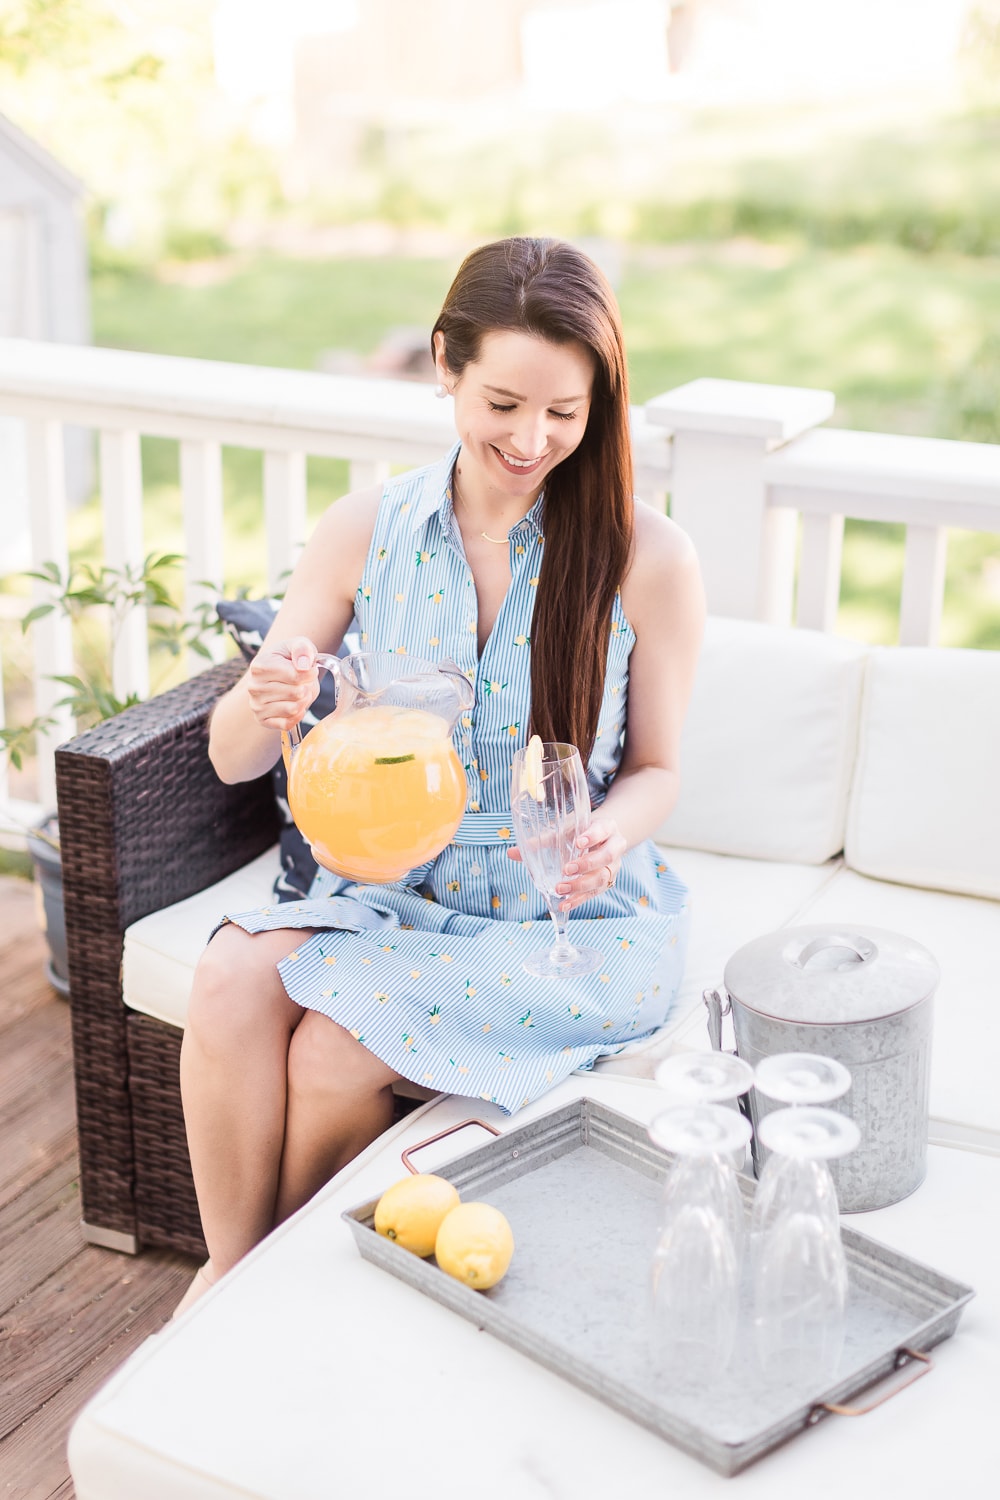 Blogger Stephanie Ziajka shares a refreshing sparkling citrus punch recipe on Diary of a Debutante